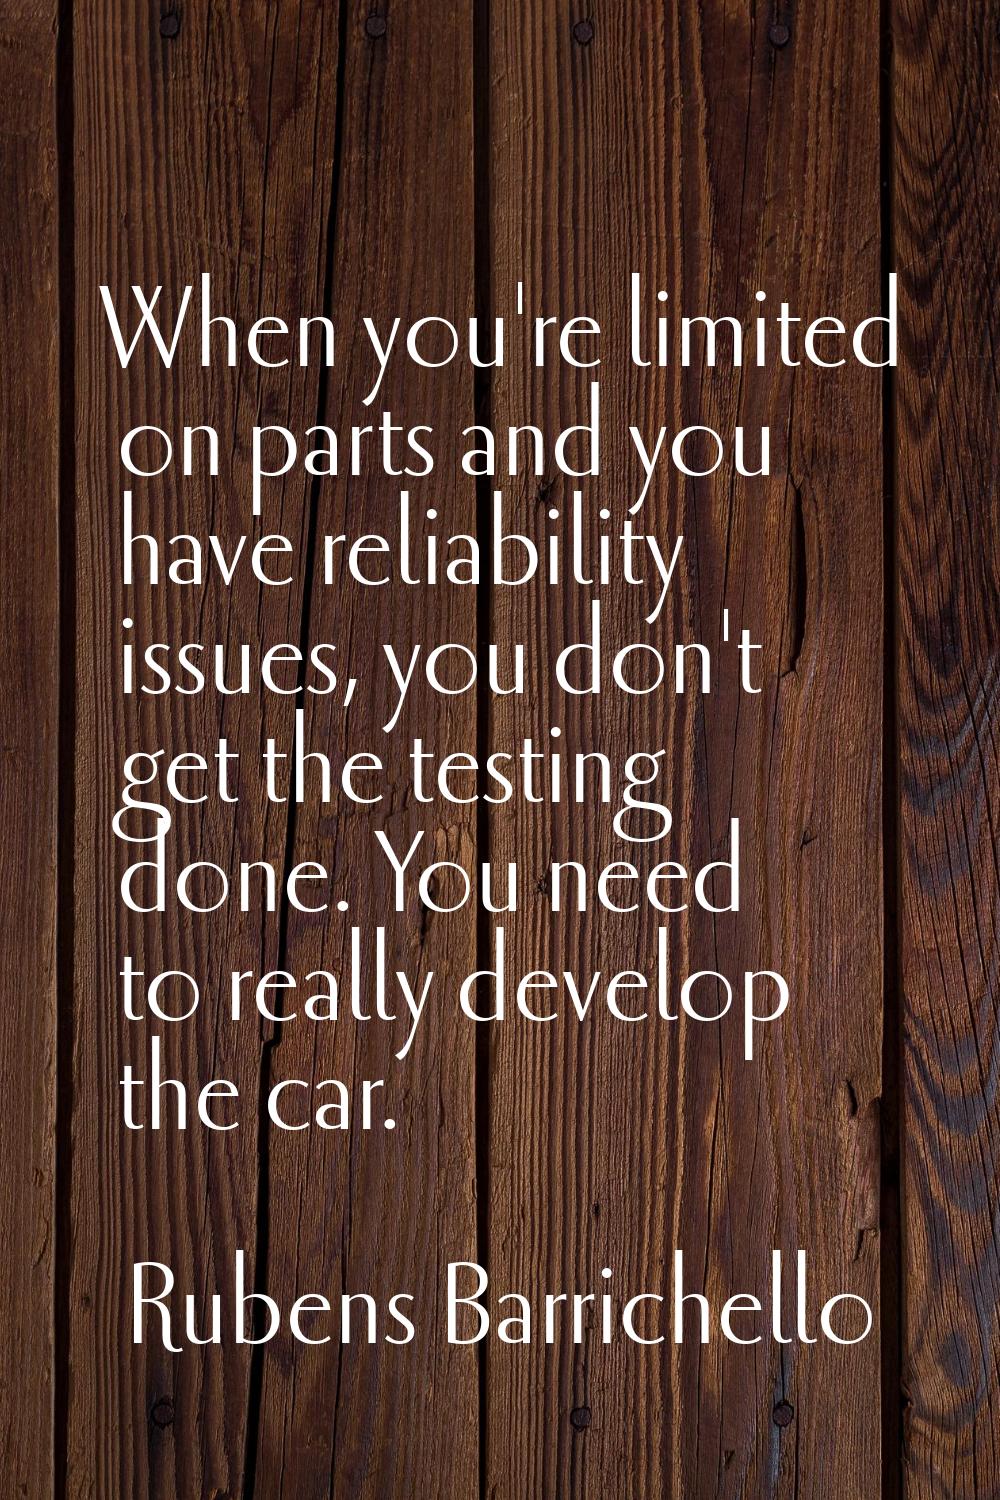 When you're limited on parts and you have reliability issues, you don't get the testing done. You n